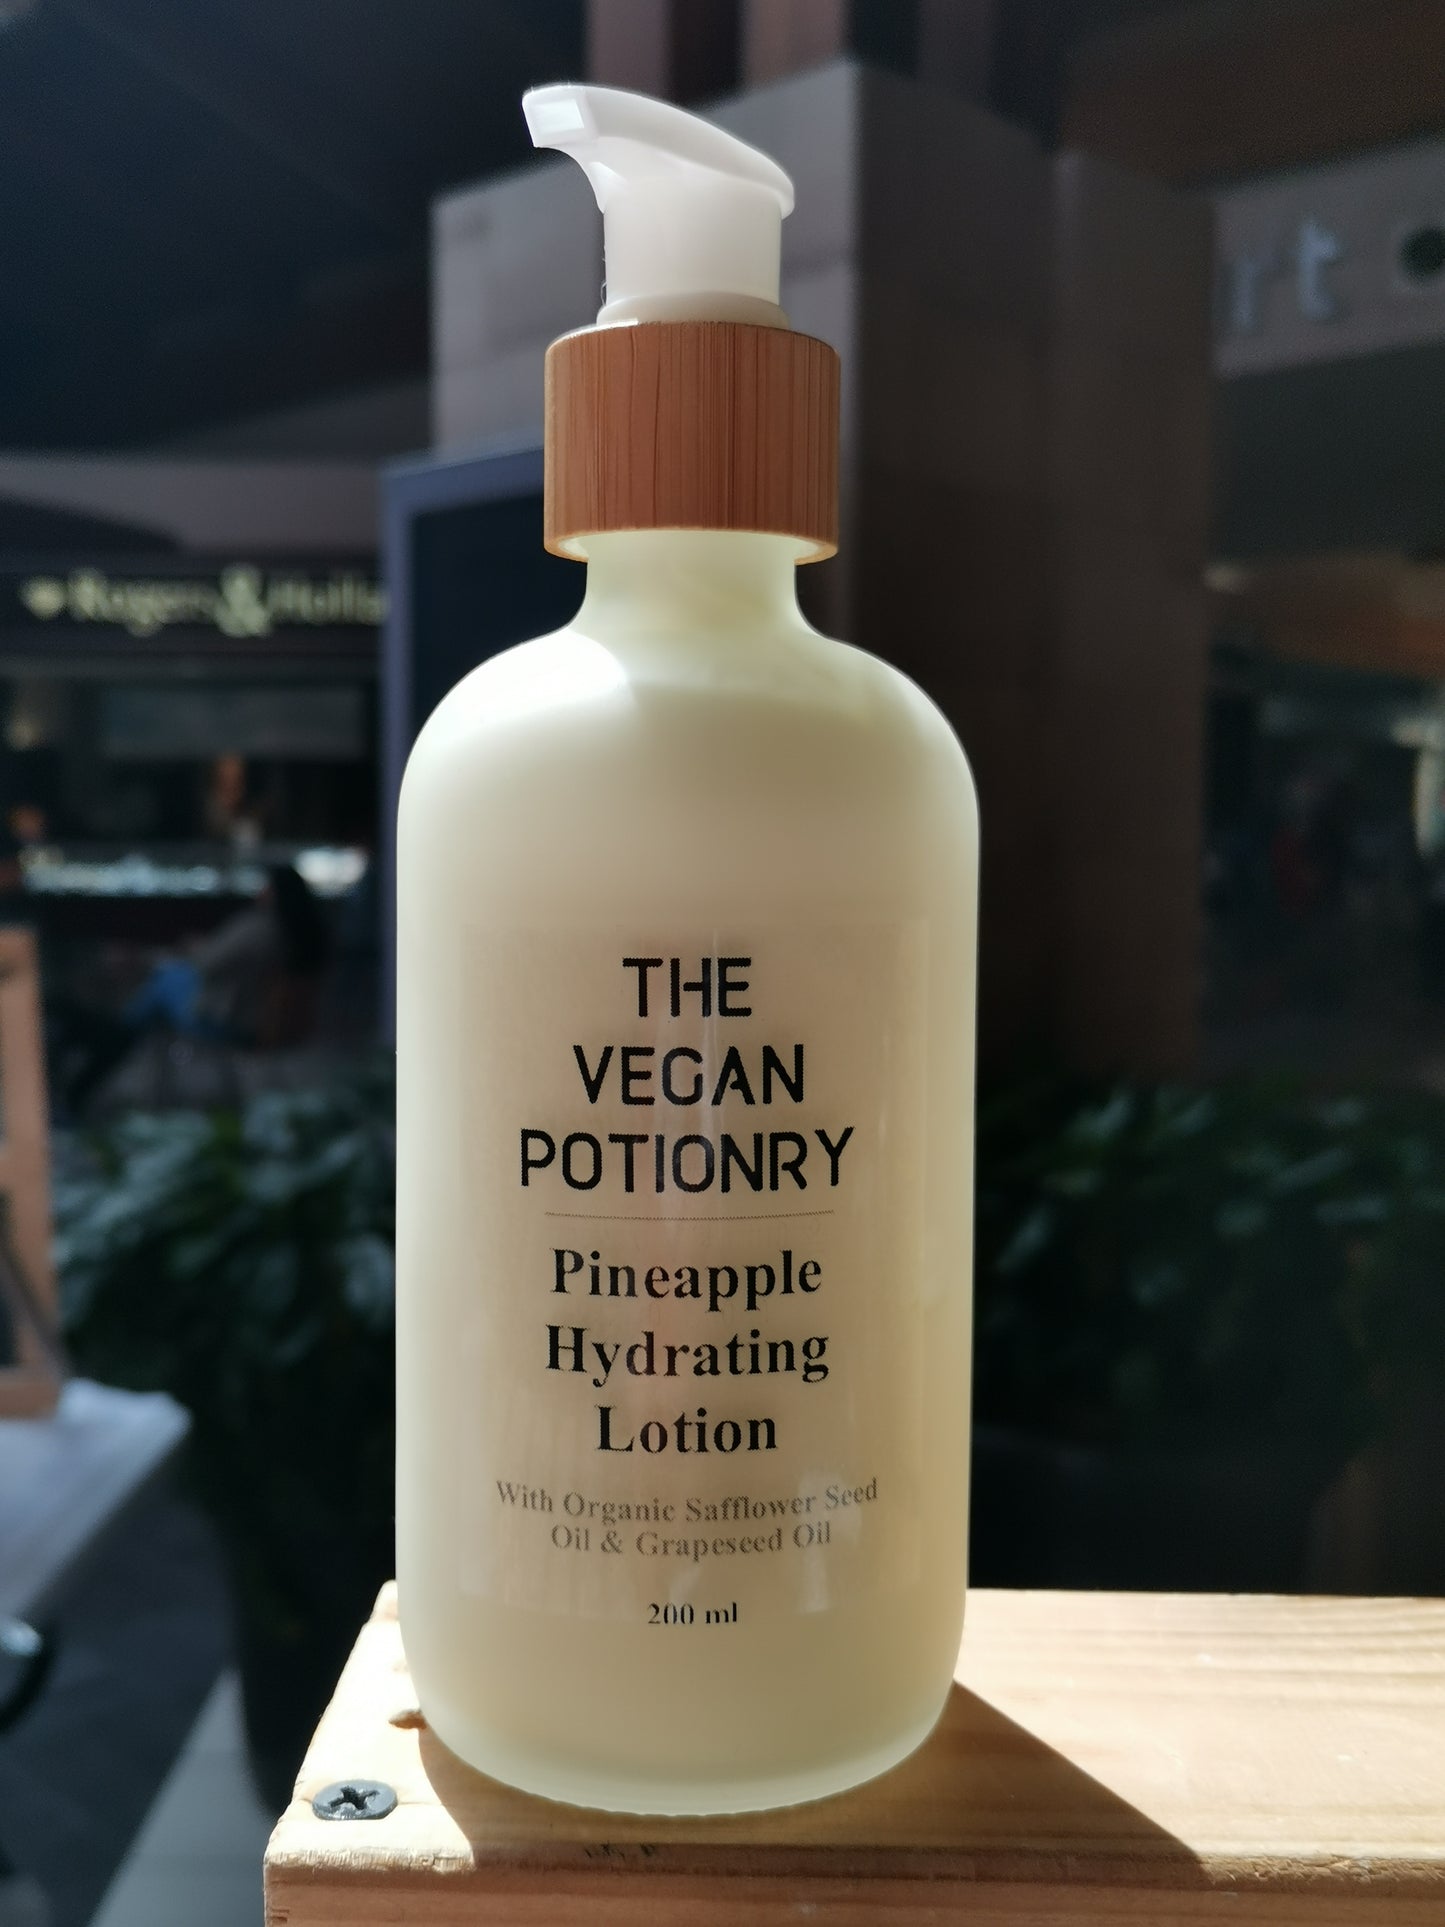 Pineapple Hydrating Lotion